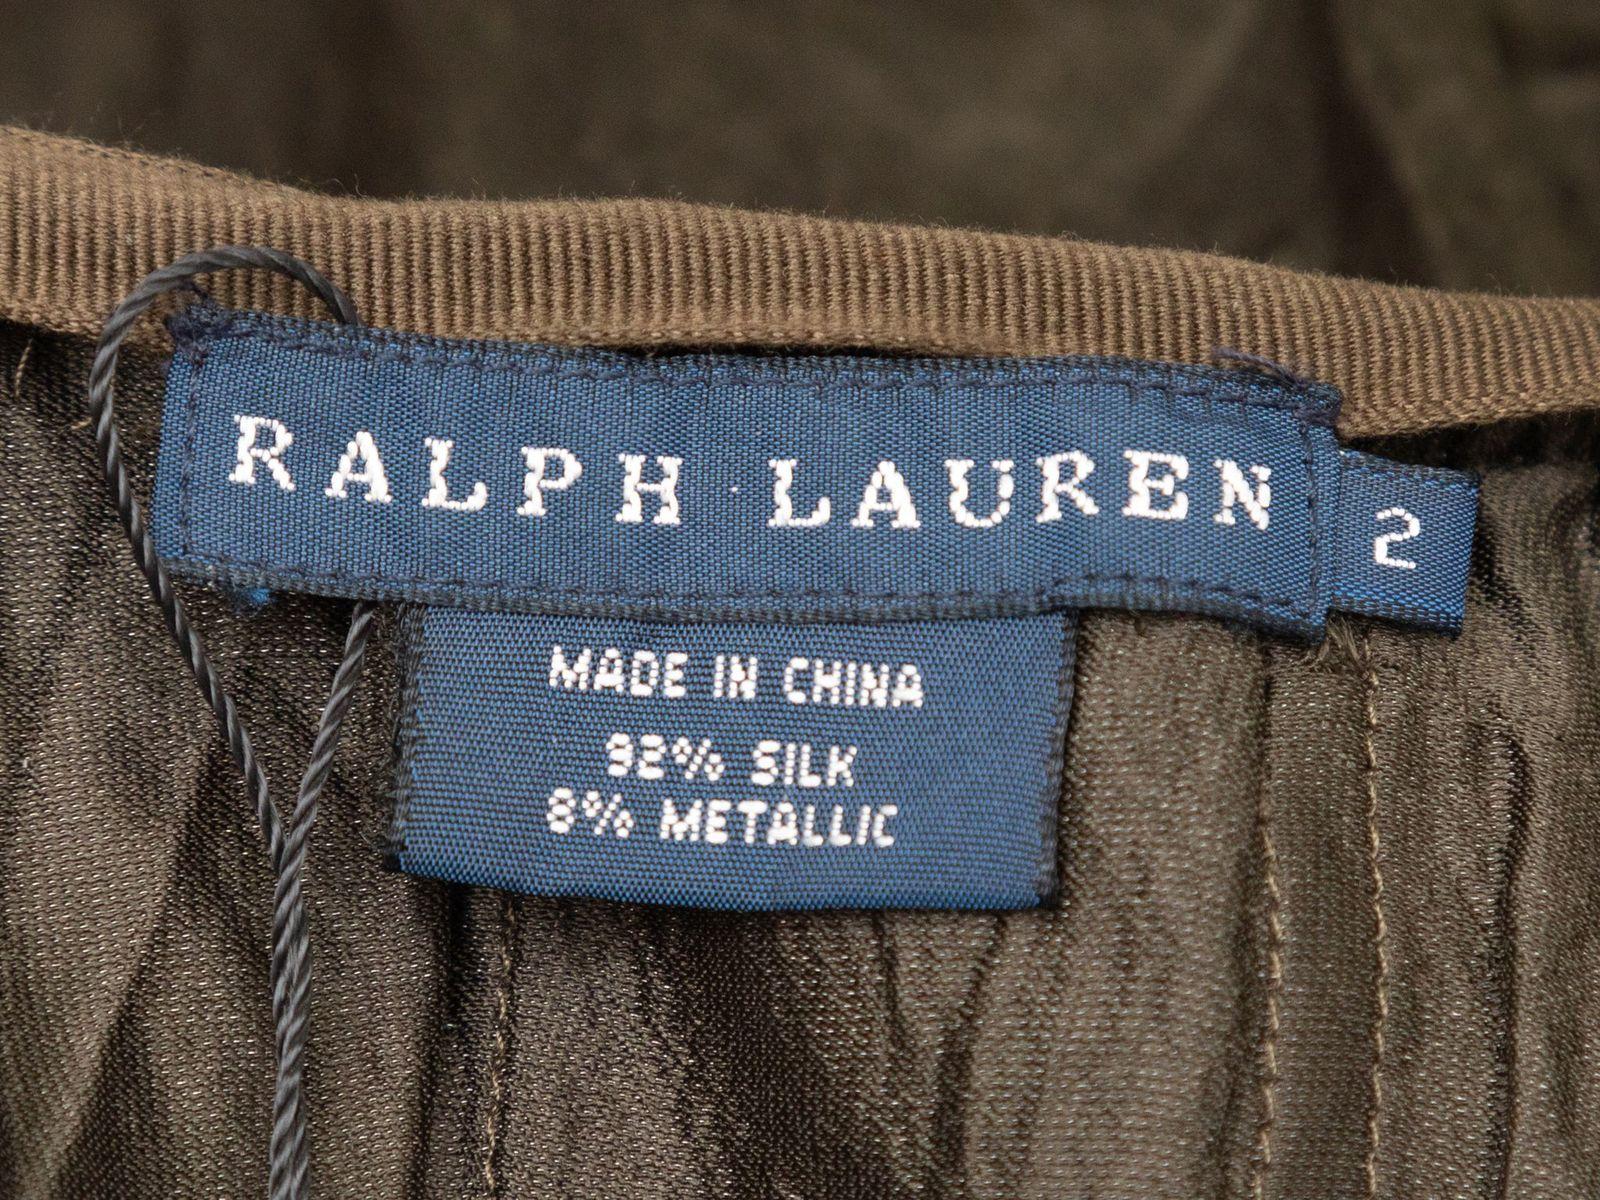 Product Details: Olive silk maxi skirt by Ralph Lauren. Pleating throughout. Zip closure at side. 28